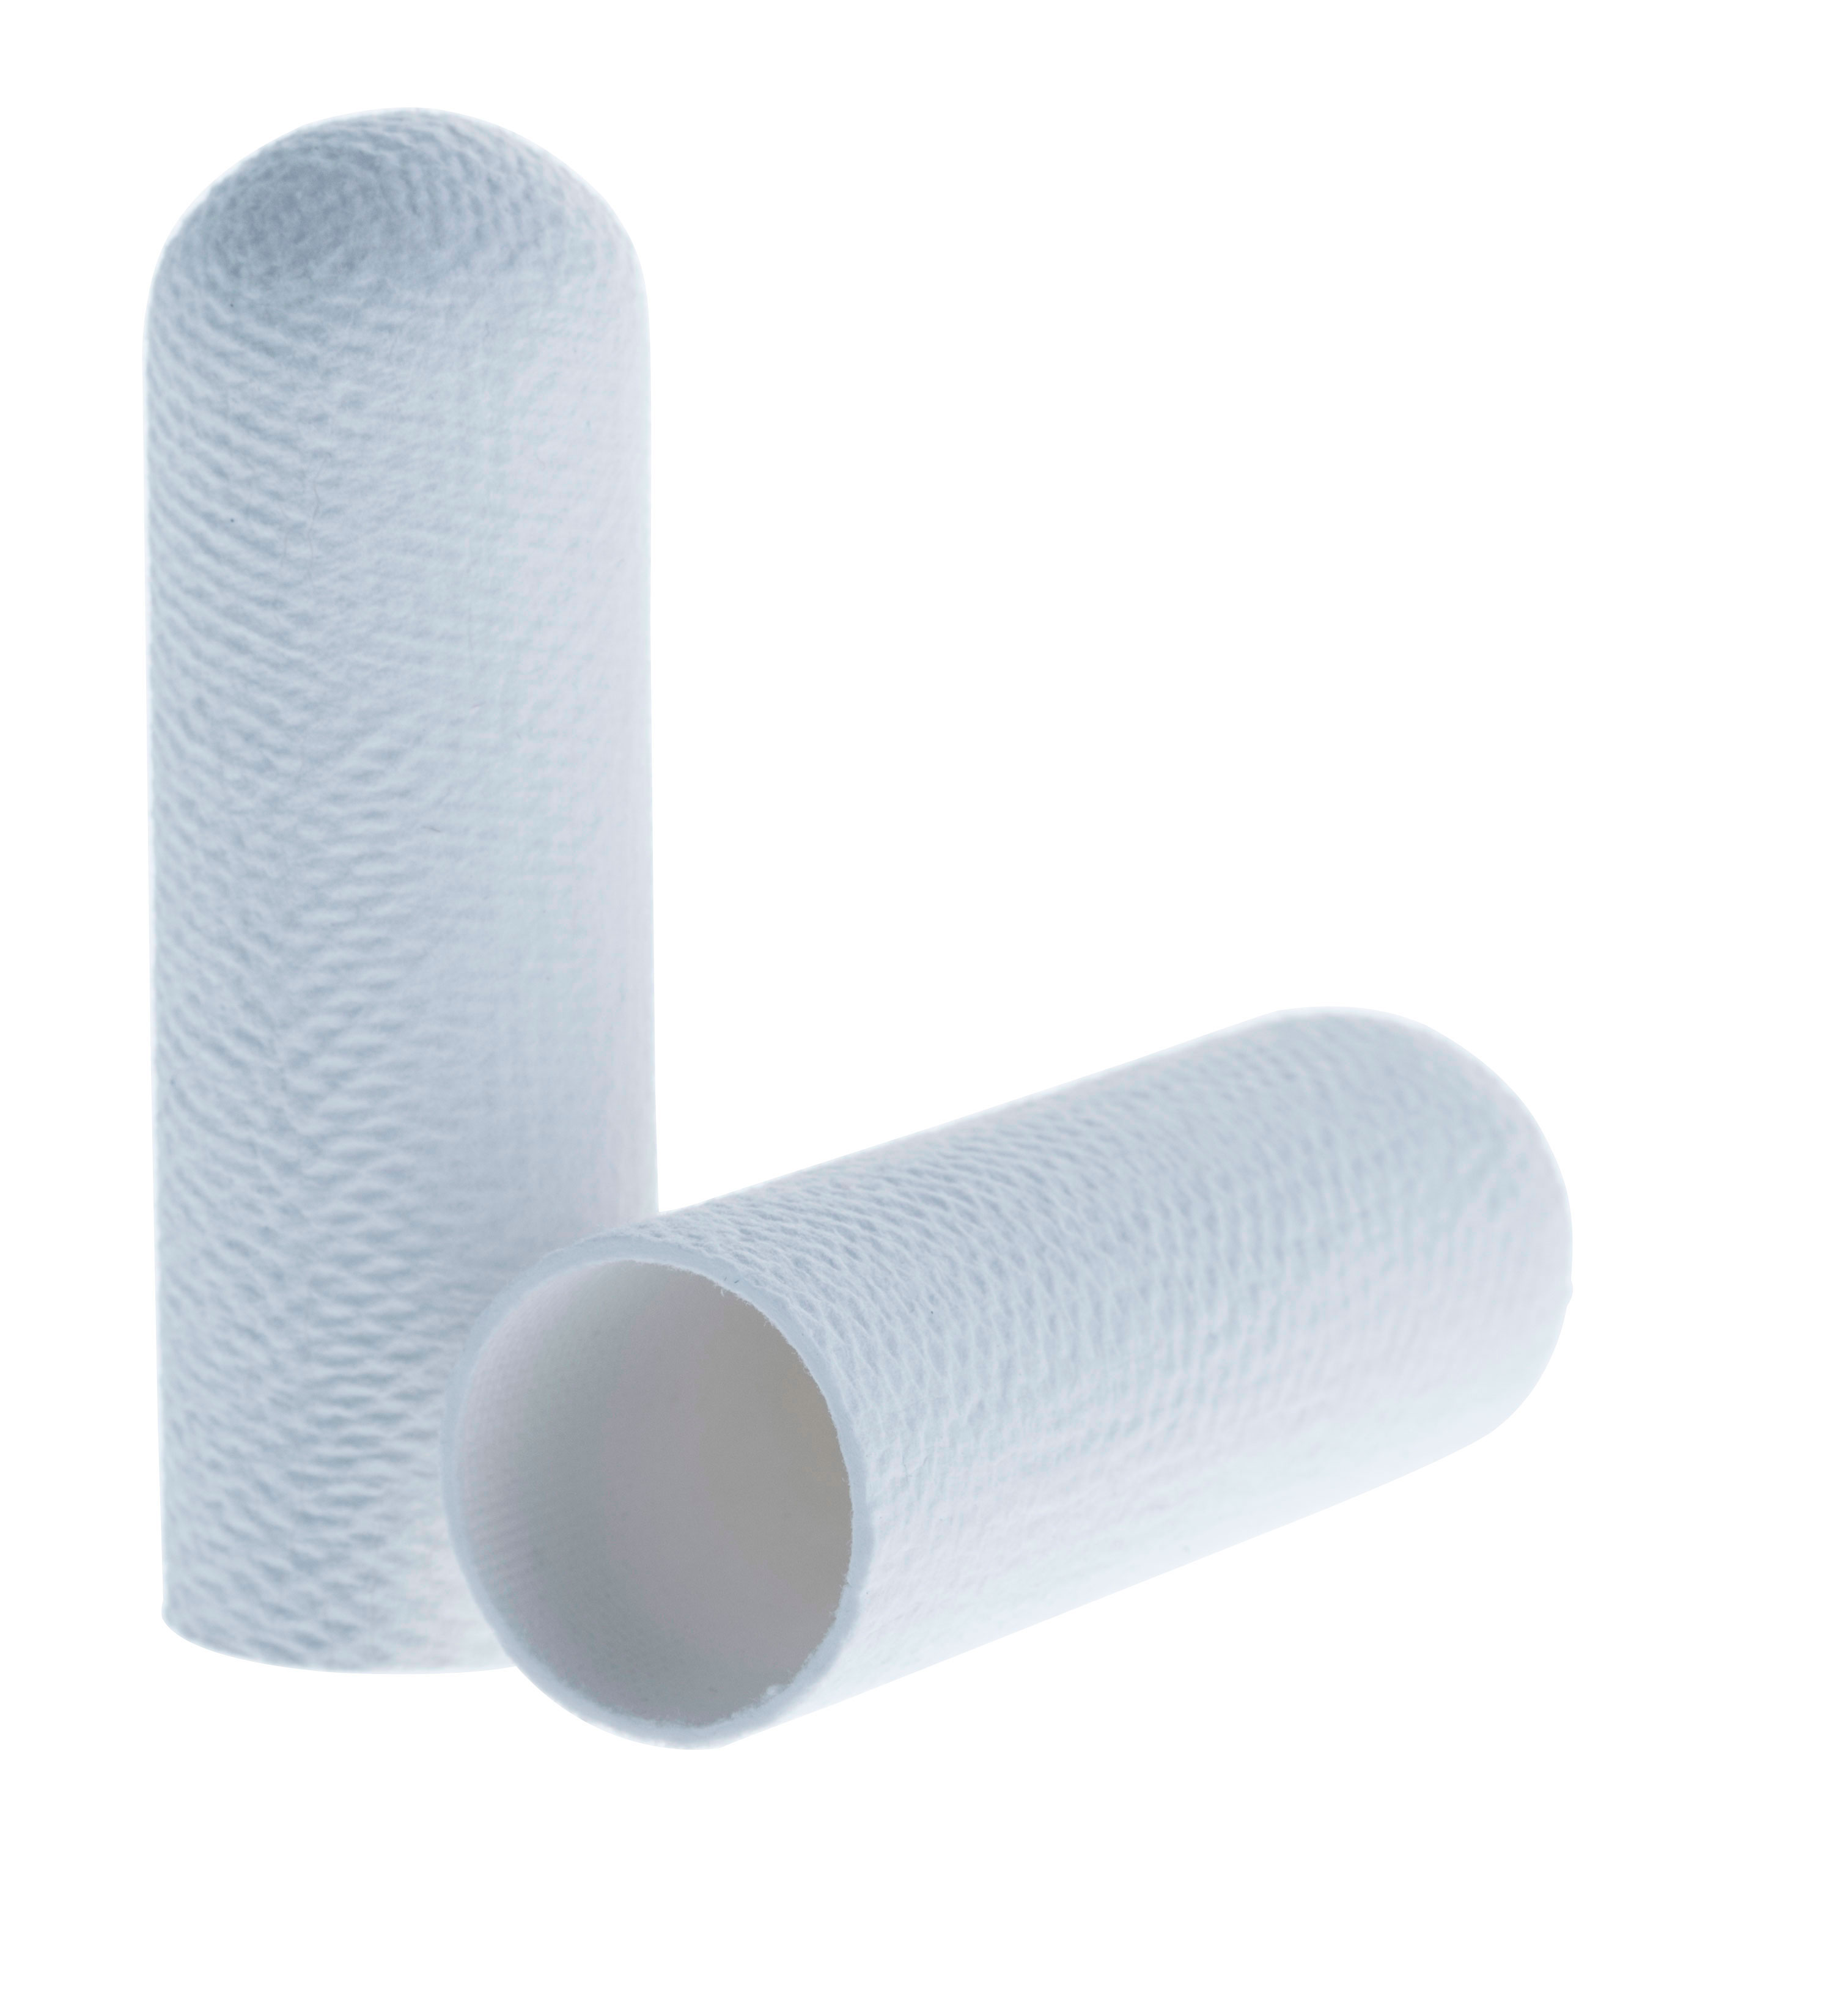 Cellulose extraction thimbles for Soxhlet extraction. SCHARLAU. Standard cellulose cartridge. Dim. Øxlength: 25x80mm. Particle retention in liquid: Nom. 8-15 microns